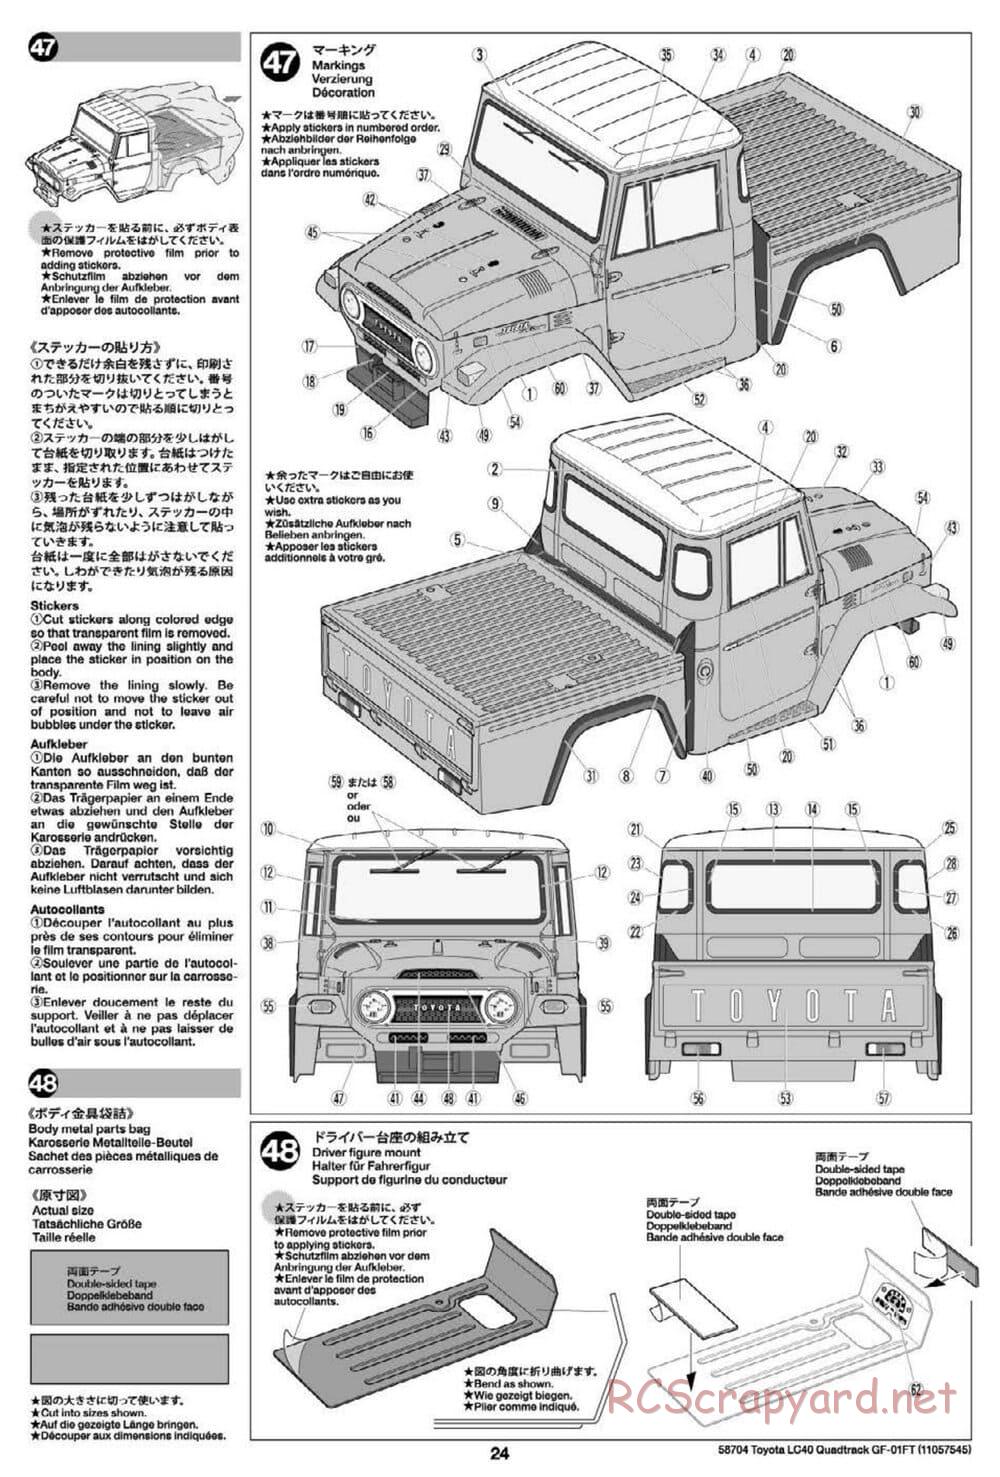 Tamiya - Toyota Land Cruiser 40 Pick-Up Quadtrack - GF-01FT Chassis - Manual - Page 24